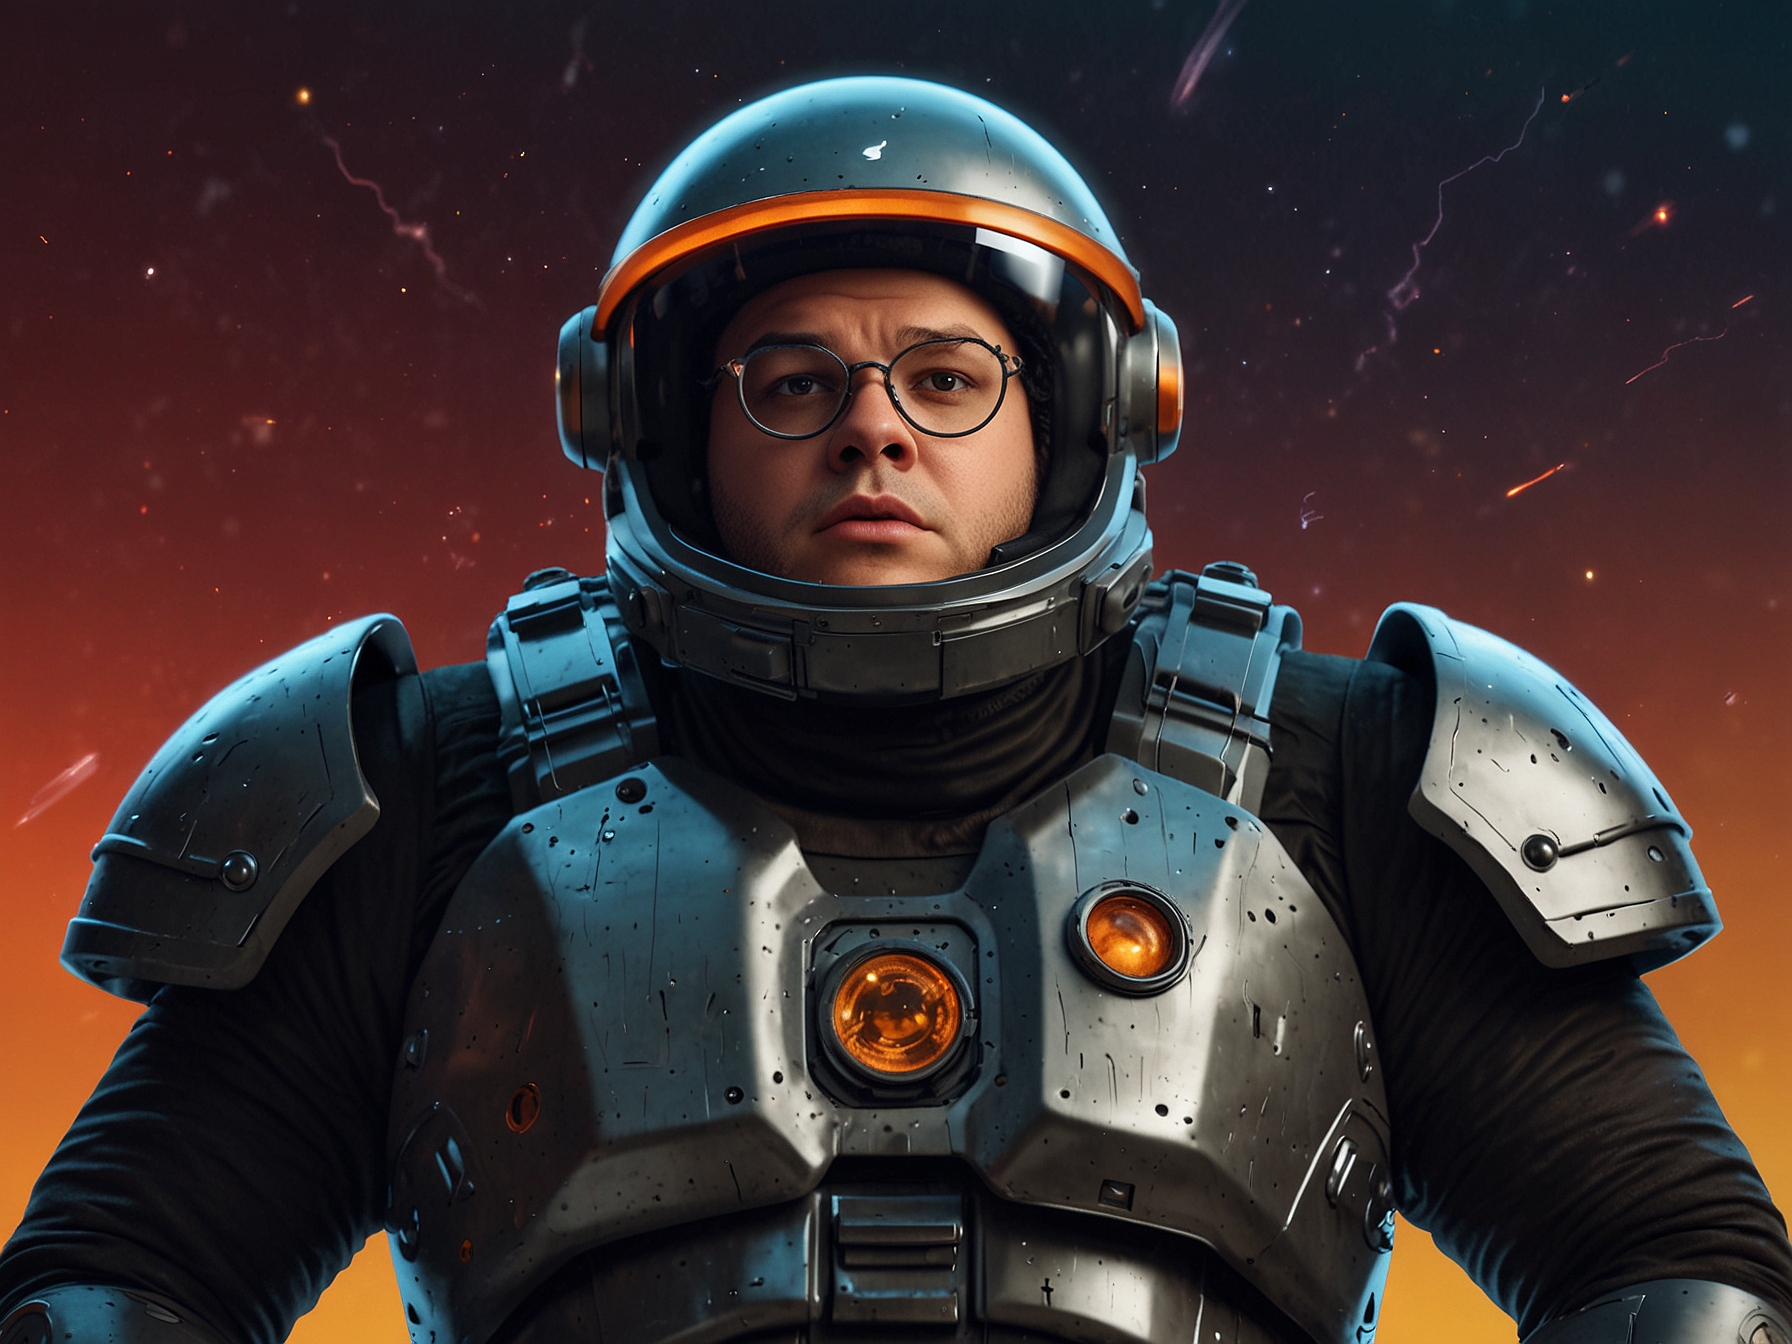 A dynamic shot showing Josh Gad in character, donning a futuristic outfit with a comically oversized helmet, paying homage to iconic sci-fi parody elements of the original 'Spaceballs.'